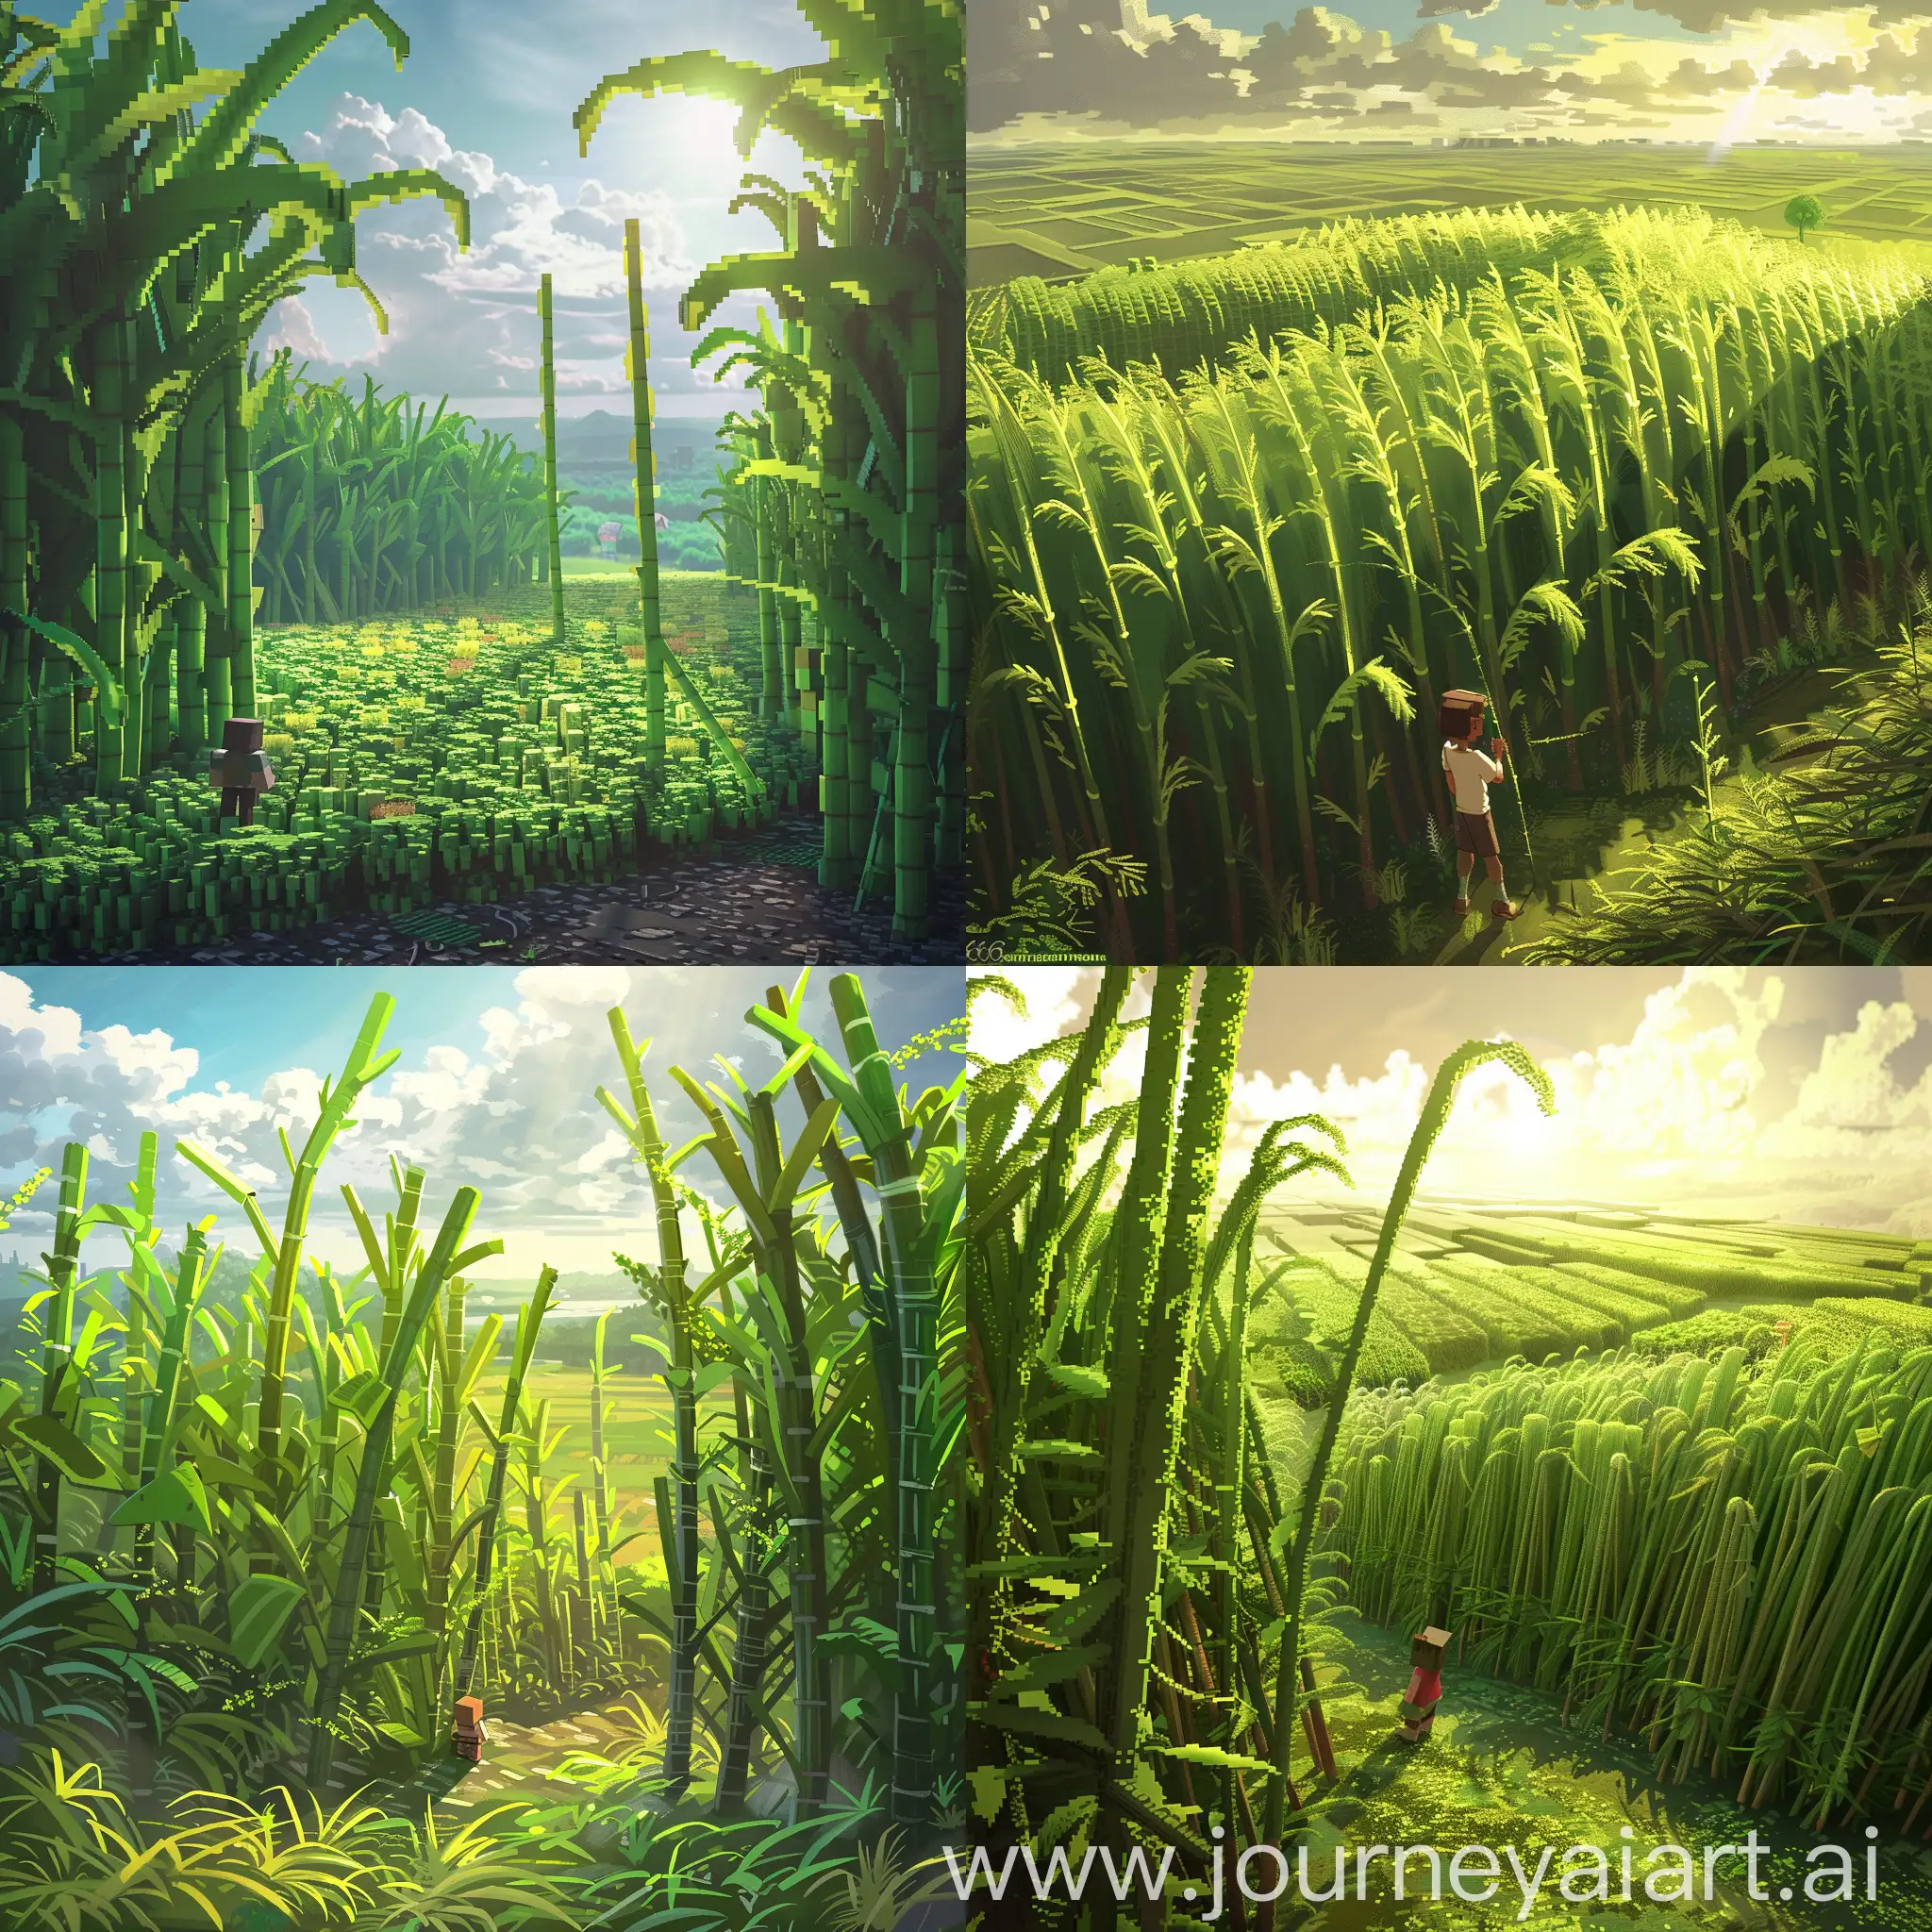 An intricate digital painting depicting the growth cycle of sugar cane in a Minecraft-inspired environment. The scene showcases lush green fields of tall sugar cane plants stretching towards the sky, swaying gently in the breeze. In the foreground, a character reminiscent of the game's avatar observes the sugar cane, studying its growth process. The character's curiosity is evident as they interact with the plant, perhaps measuring its height or inspecting its stalks. The vibrant colors and detailed textures bring the Minecraft world to life, with pixelated elements blending seamlessly with more realistic surroundings. Soft sunlight filters through the foliage, casting subtle shadows on the ground and adding depth to the scene. In the background, distant landscapes hint at the vastness of the Minecraft world, inviting viewers to explore further. The illustration captures the essence of discovery and exploration within the game, celebrating the wonder of its natural elements without the need for explicit text headings. 